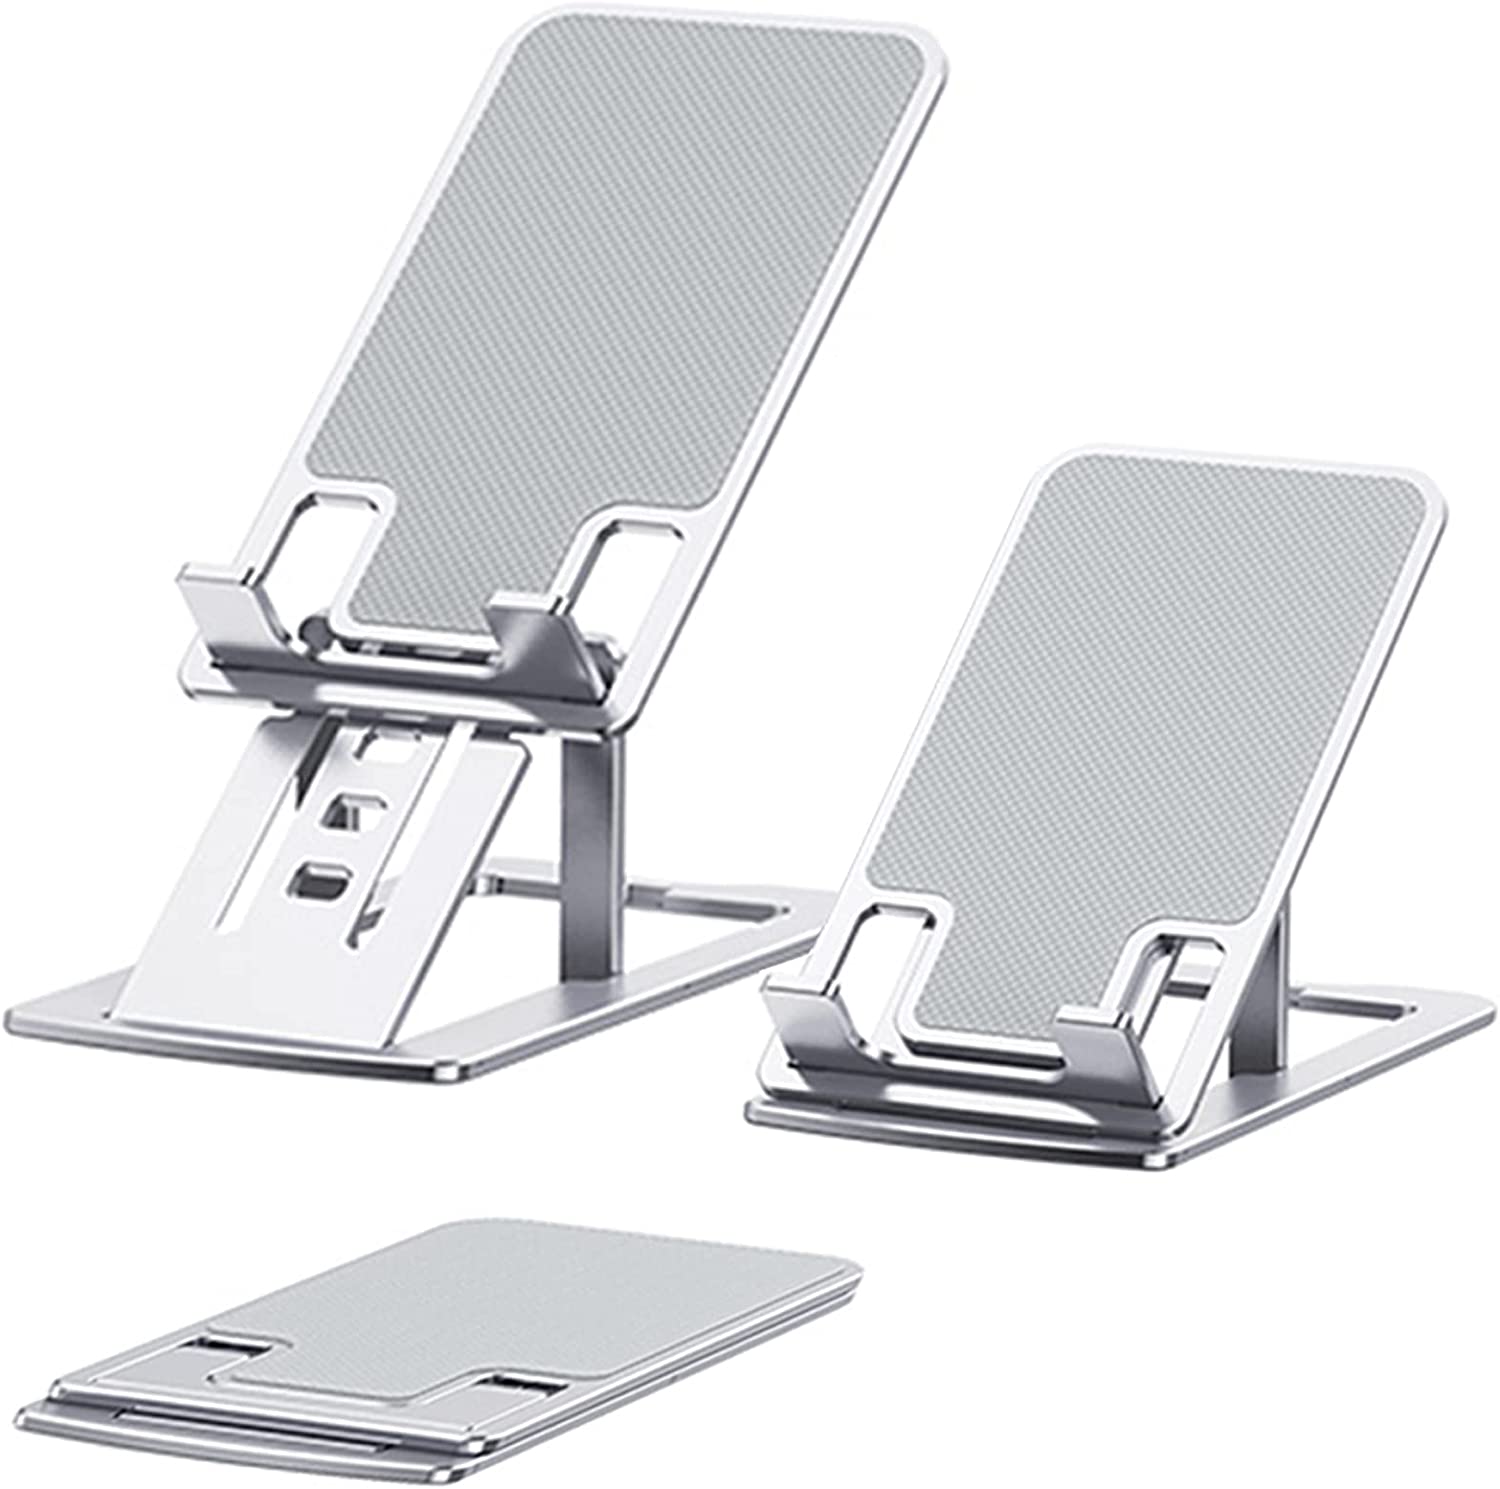 Cell Phone Holder with Aluminum, Foldable Cell Phone Stand for Office and Travel, Adjustable Desk Phone Holder Compatible with All Cell Phone and Tablets Under 12"(Silver)